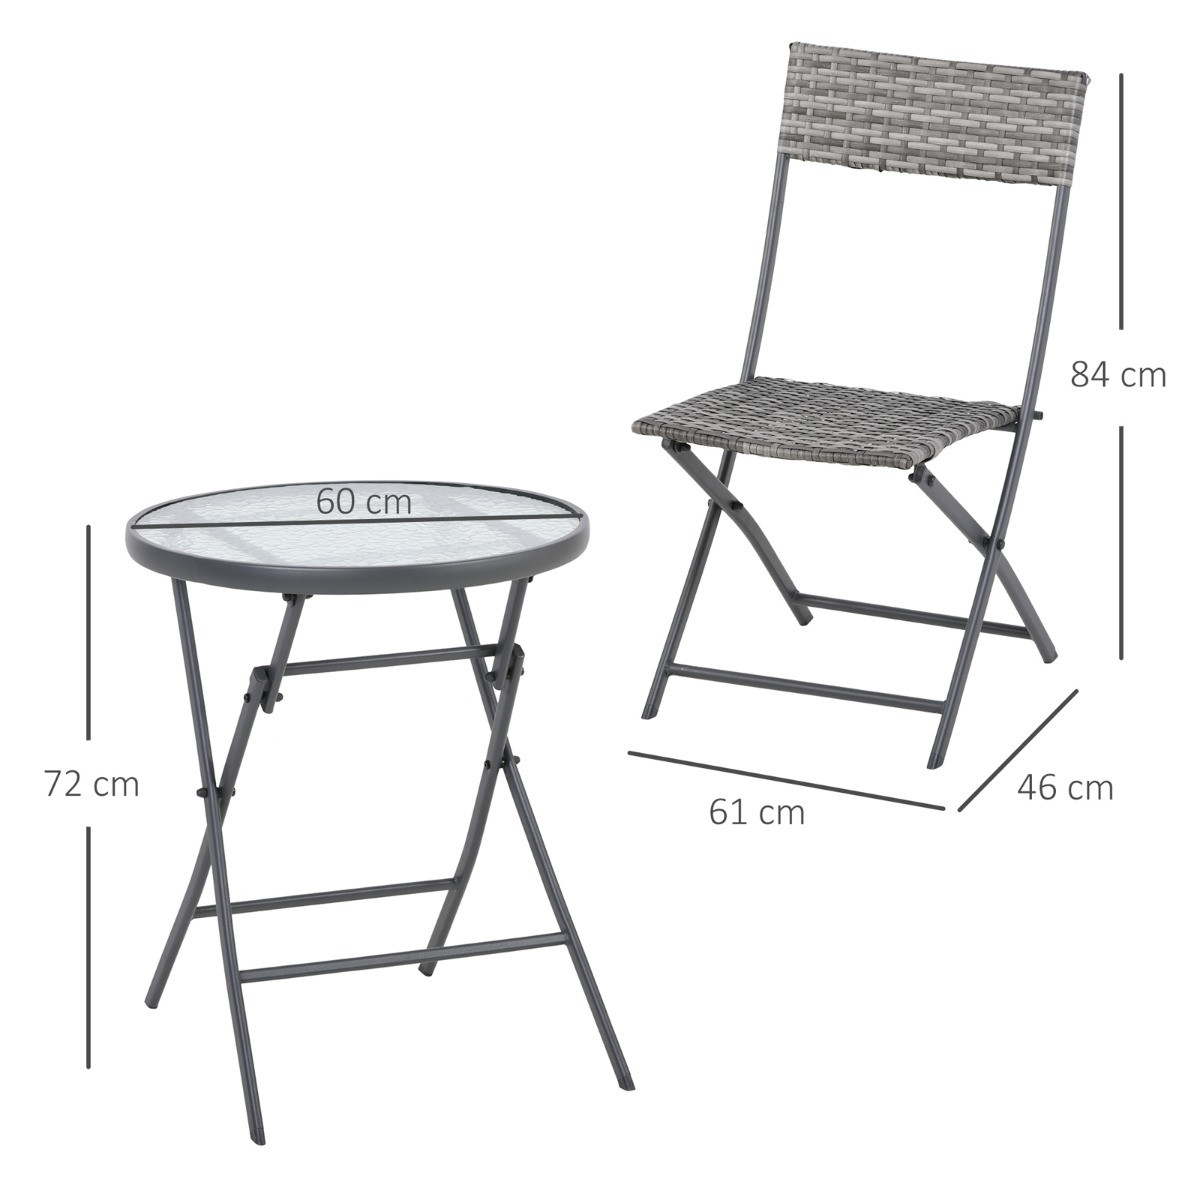 Outsunny Rattan Wicker Bistro Foldable Table Set, 3 Piece - Grey>